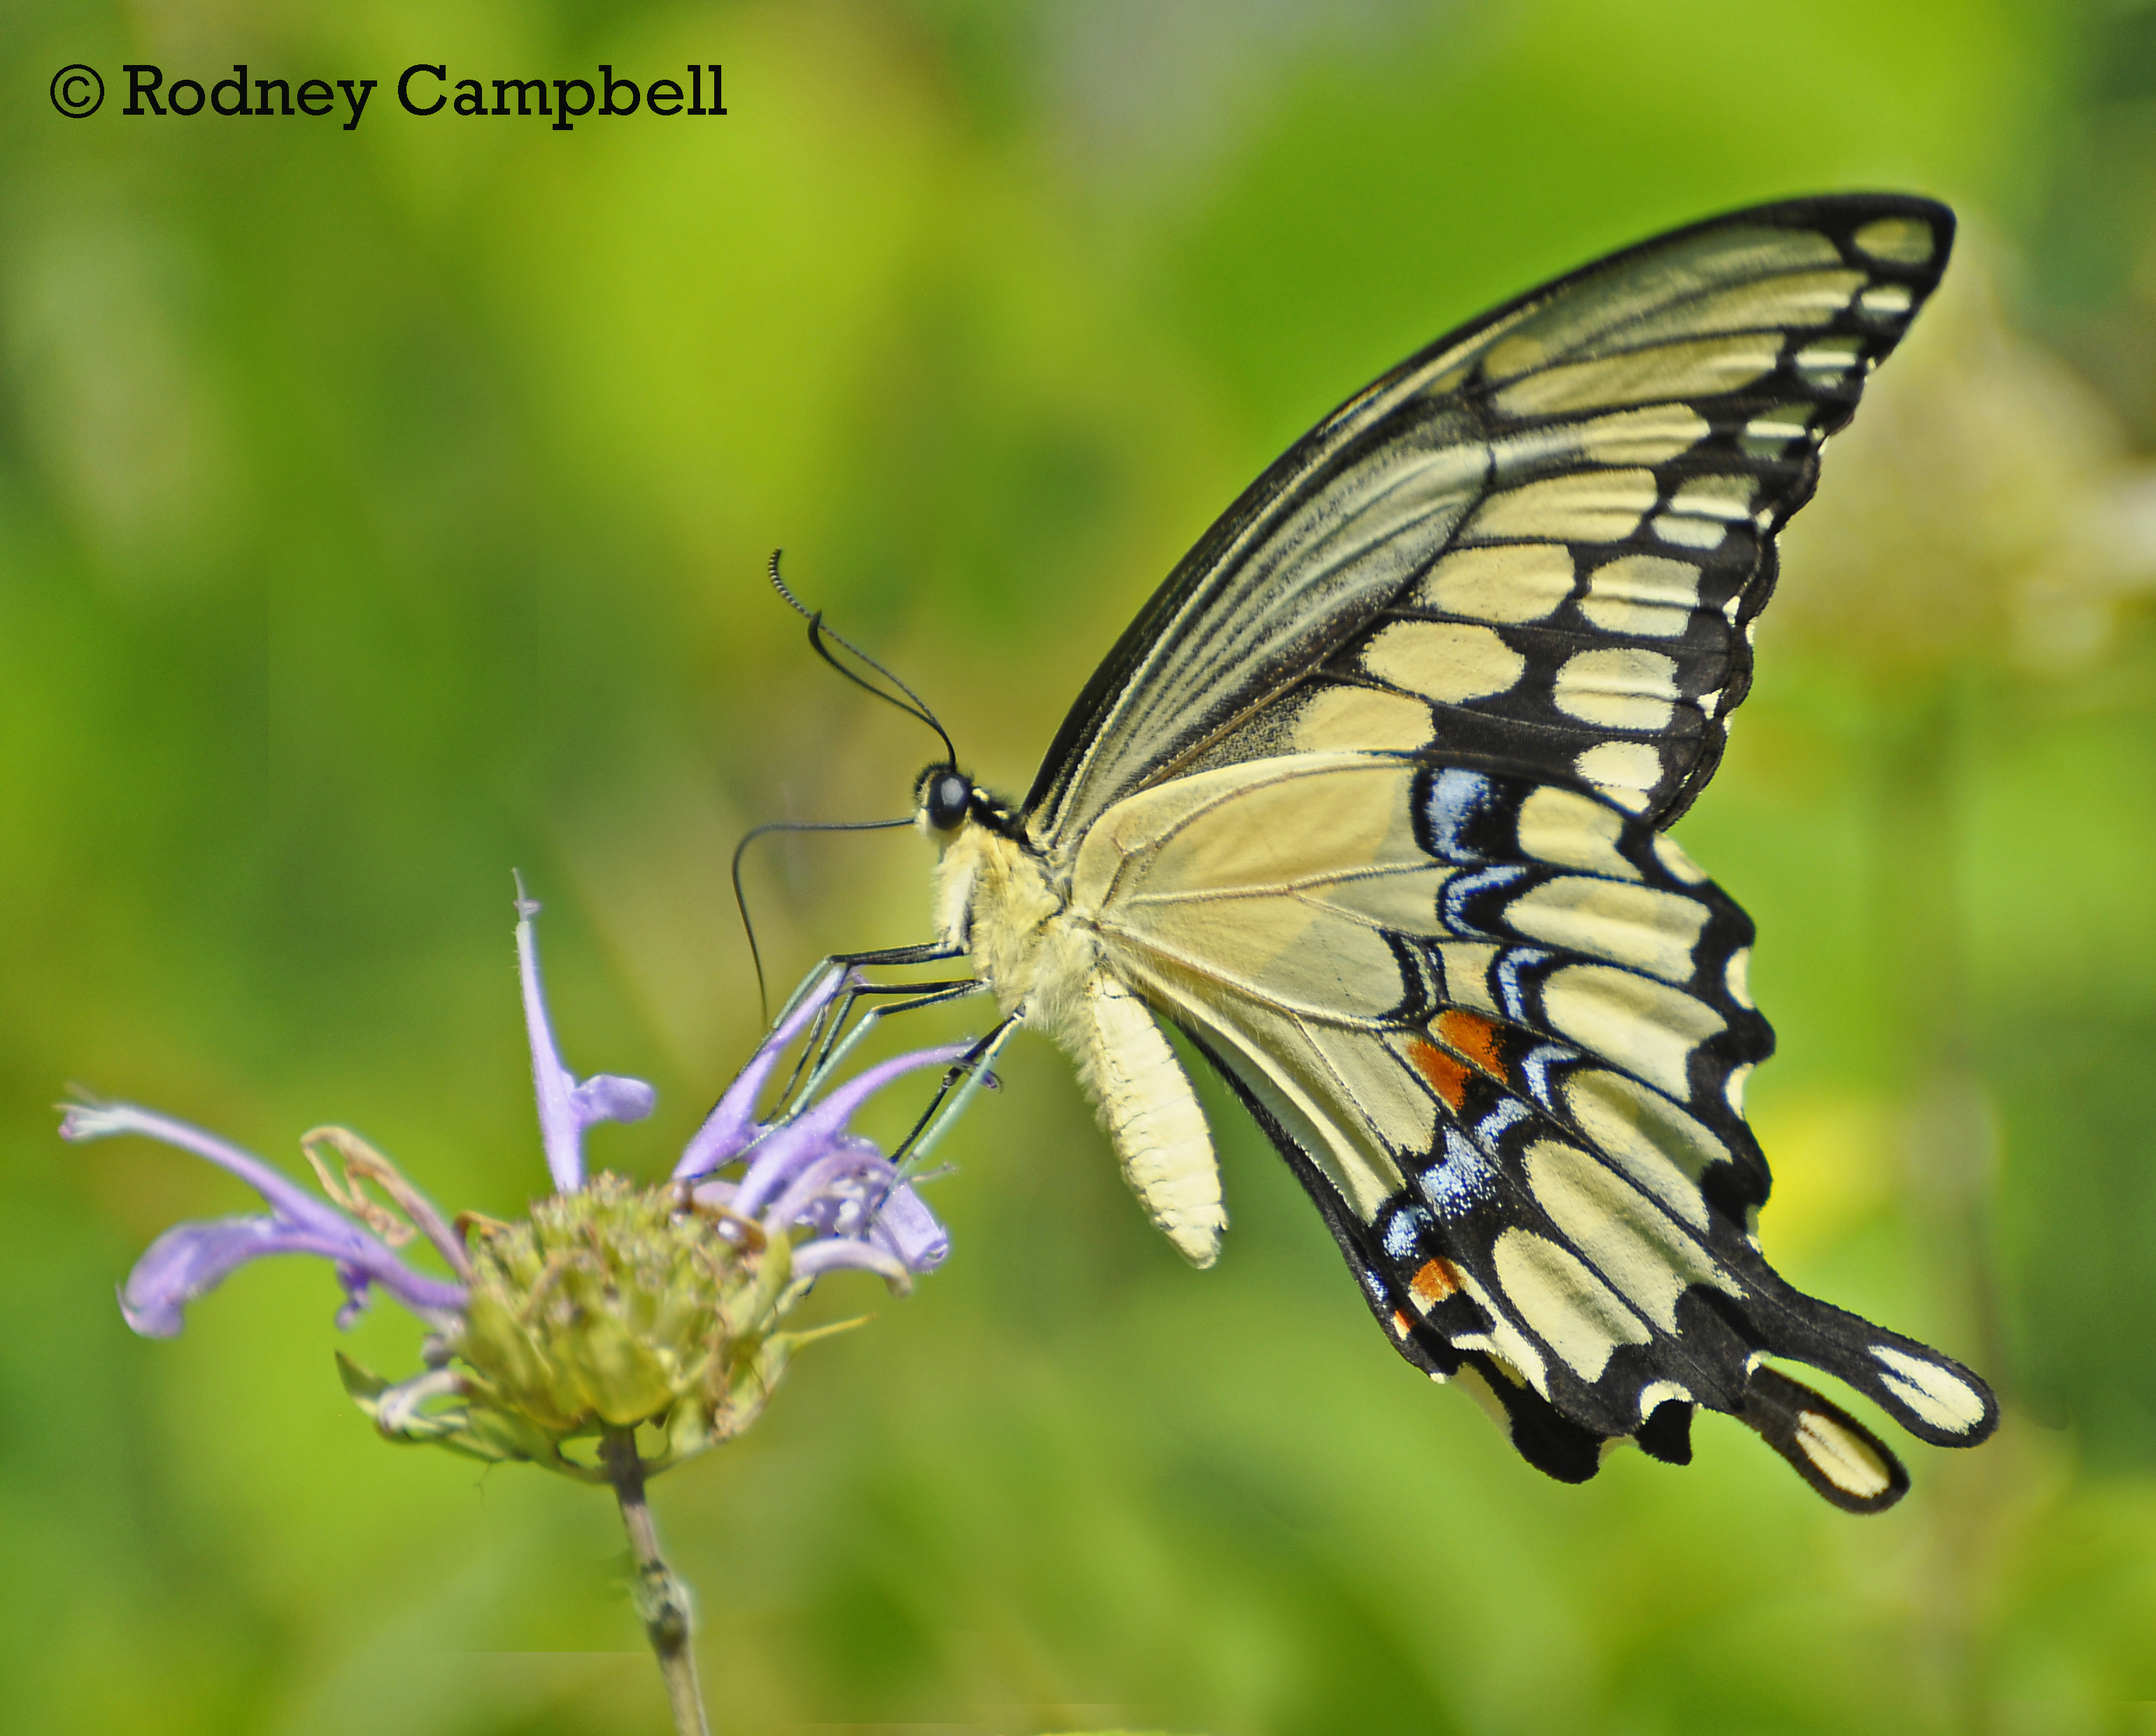 Giant Swallowtail Papilio cresphontes Cramer, 1777 | Butterflies and ...